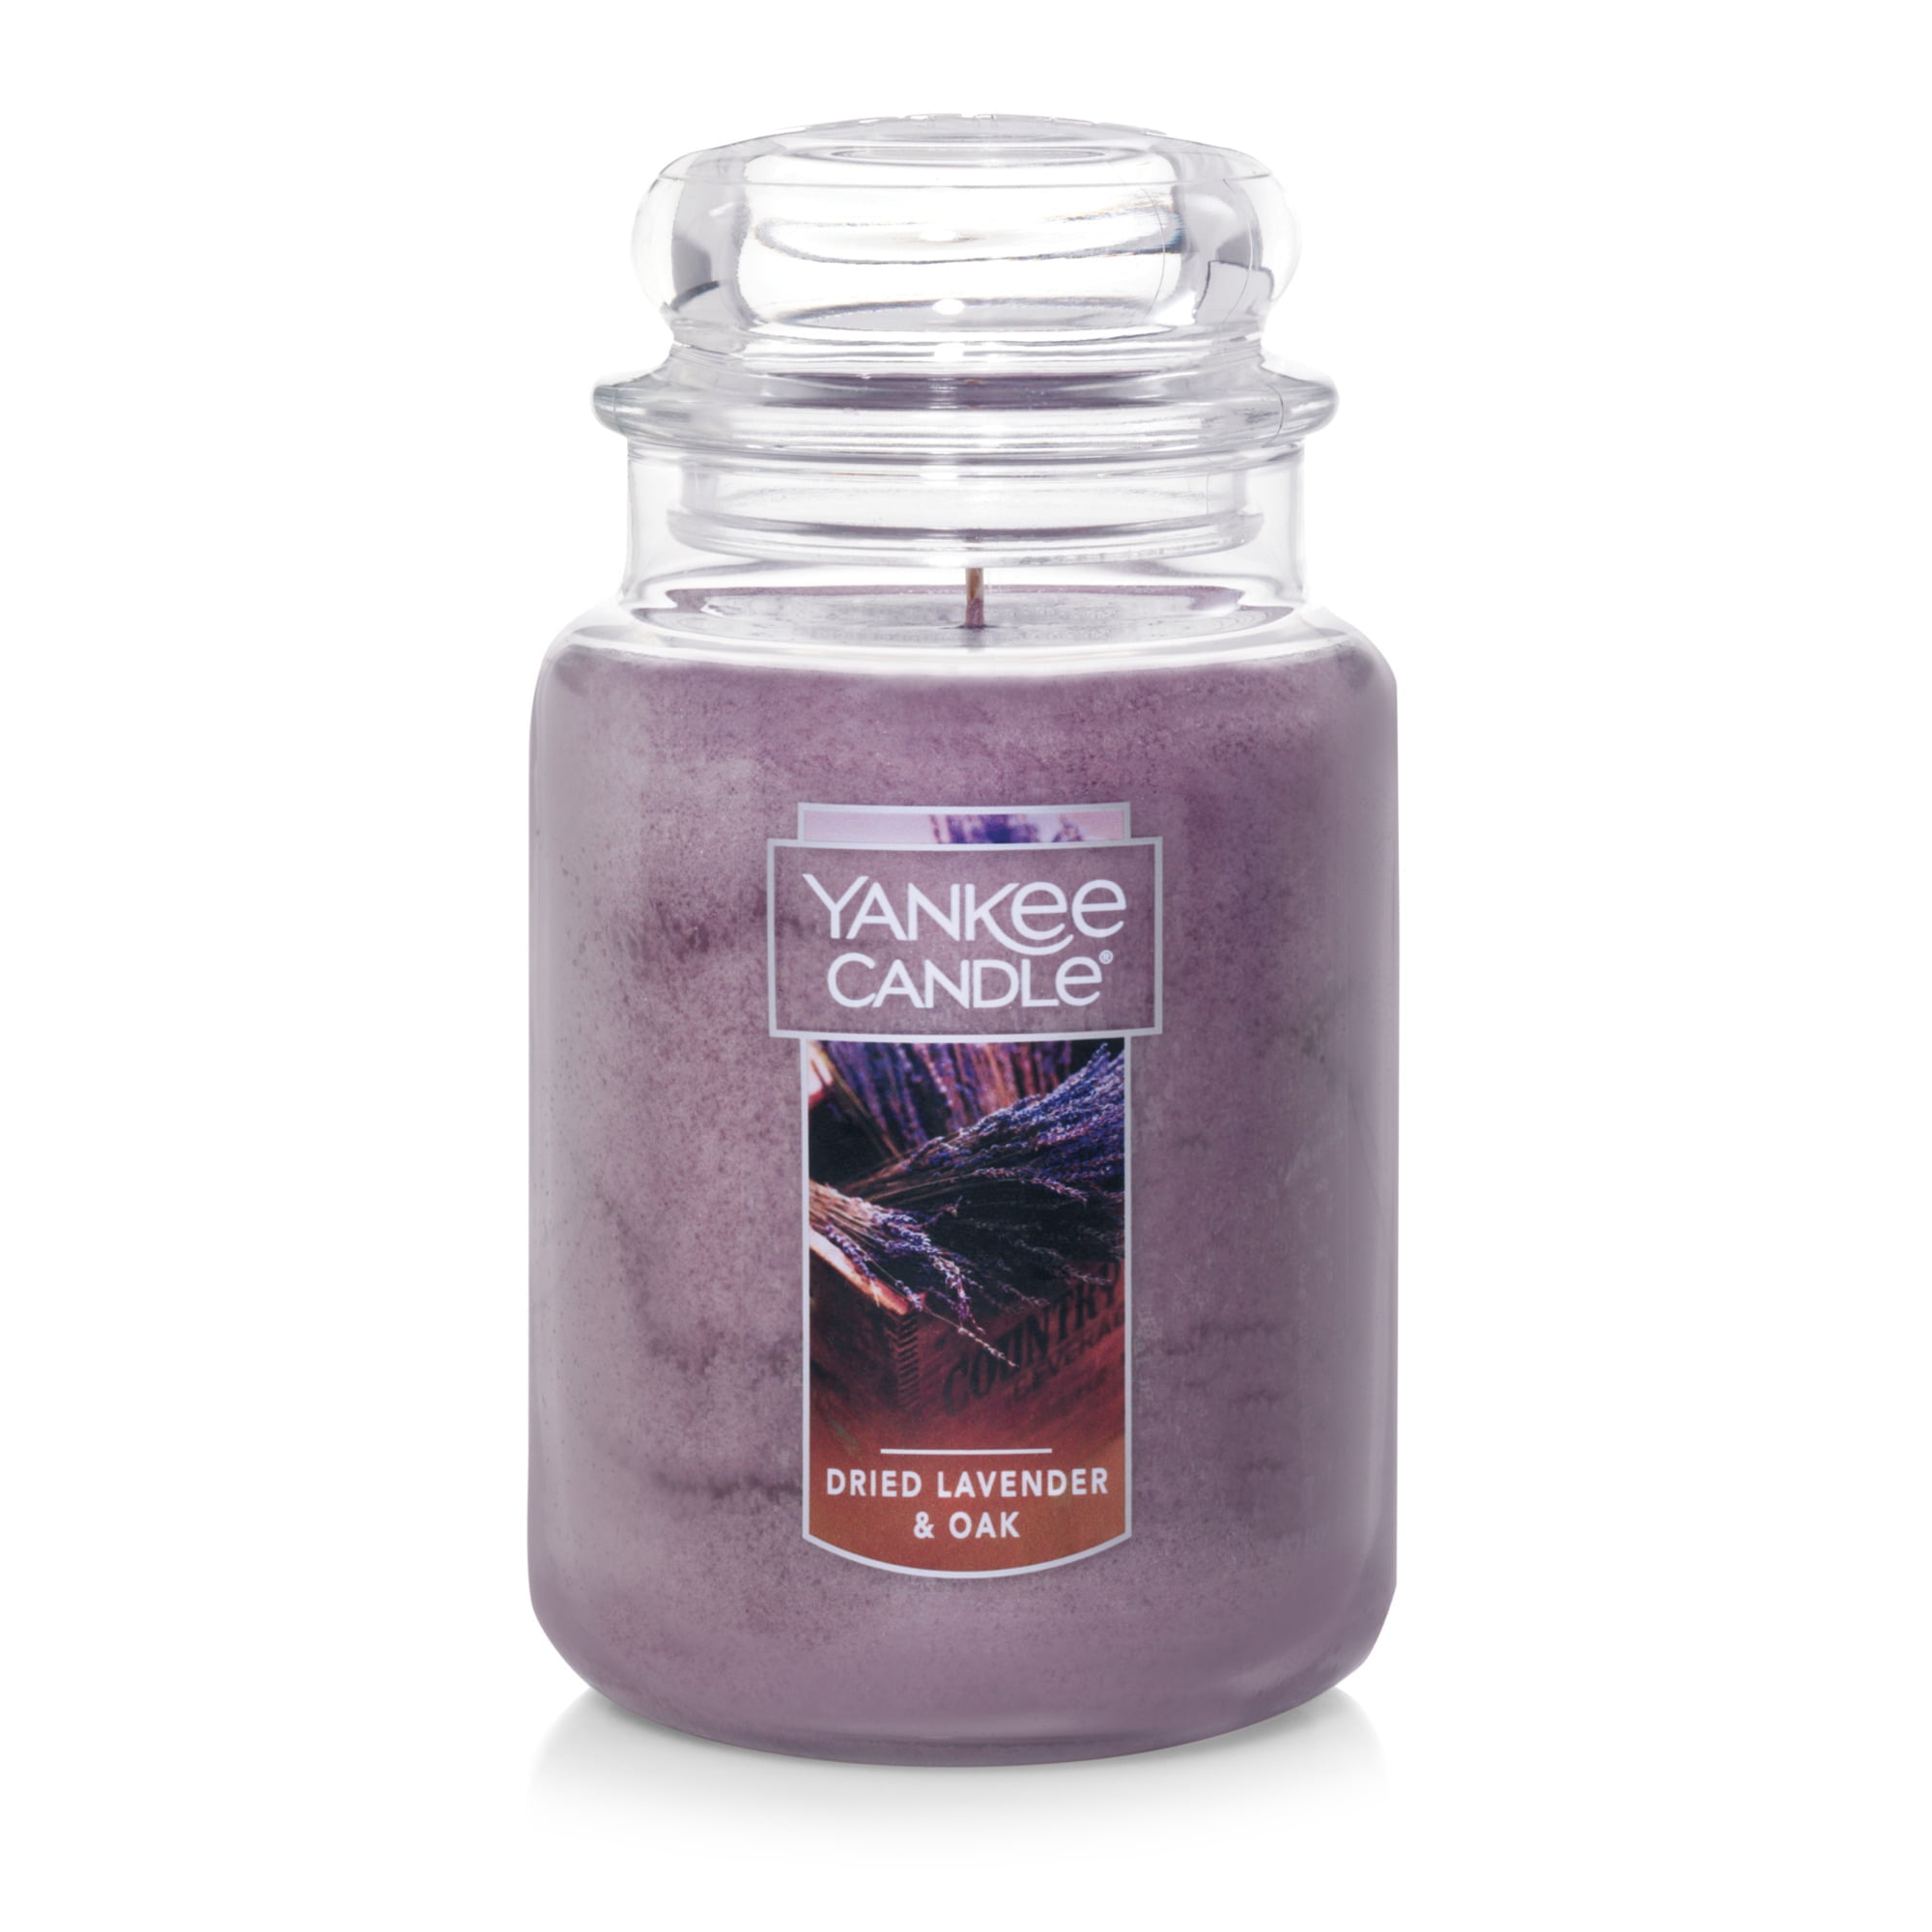 Yankee Candle Large Jar Scented Candle Dried Lavender & Oak 22 oz